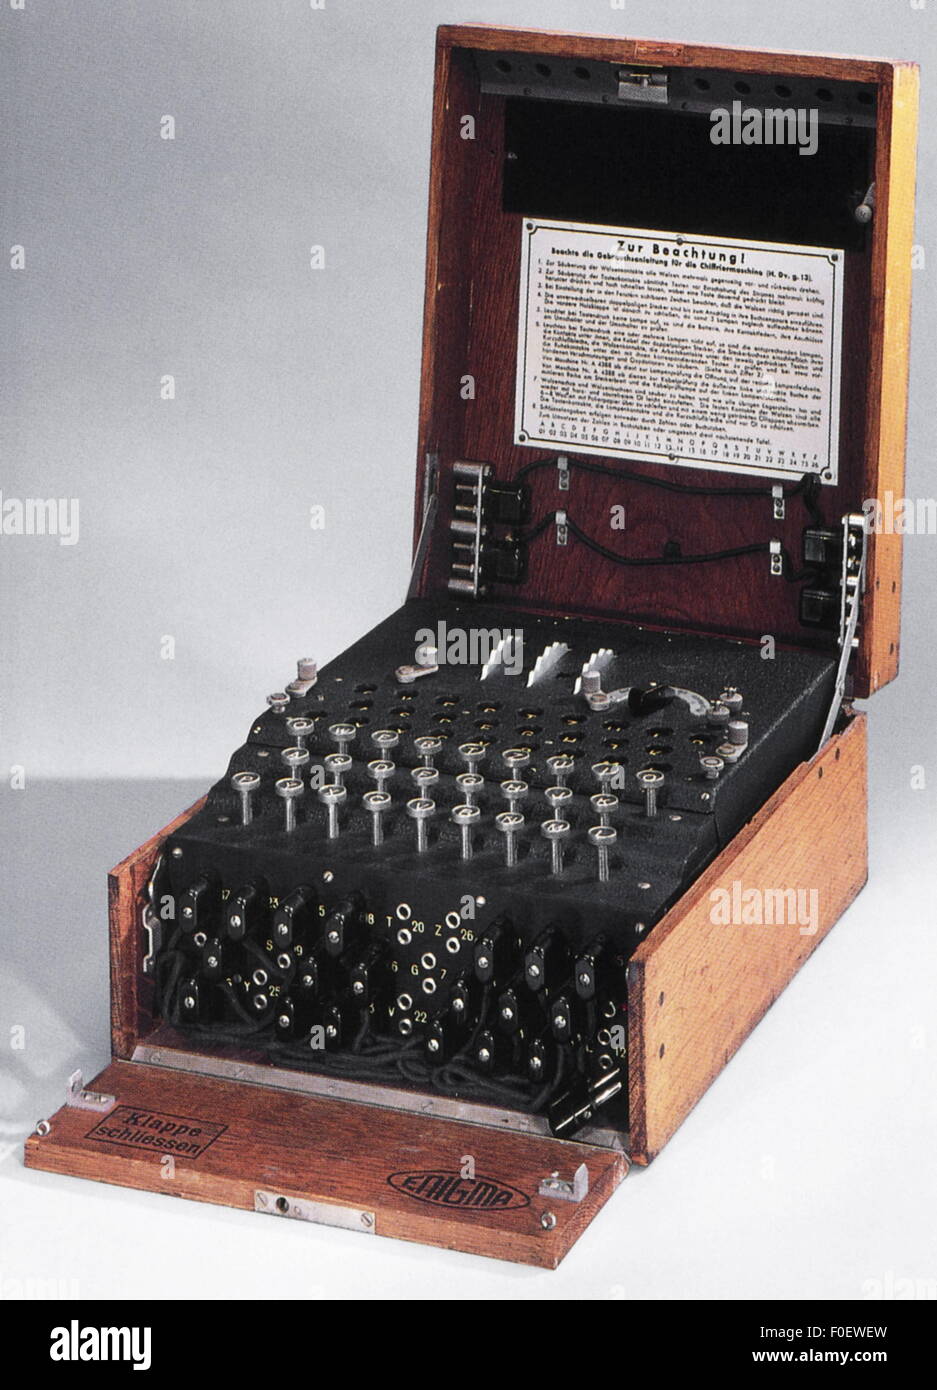 espionage, German 'Enigma' machine, used for the encryption and decryption of secret message, in service 1923-1945, Additional-Rights-Clearences-Not Available Stock Photo